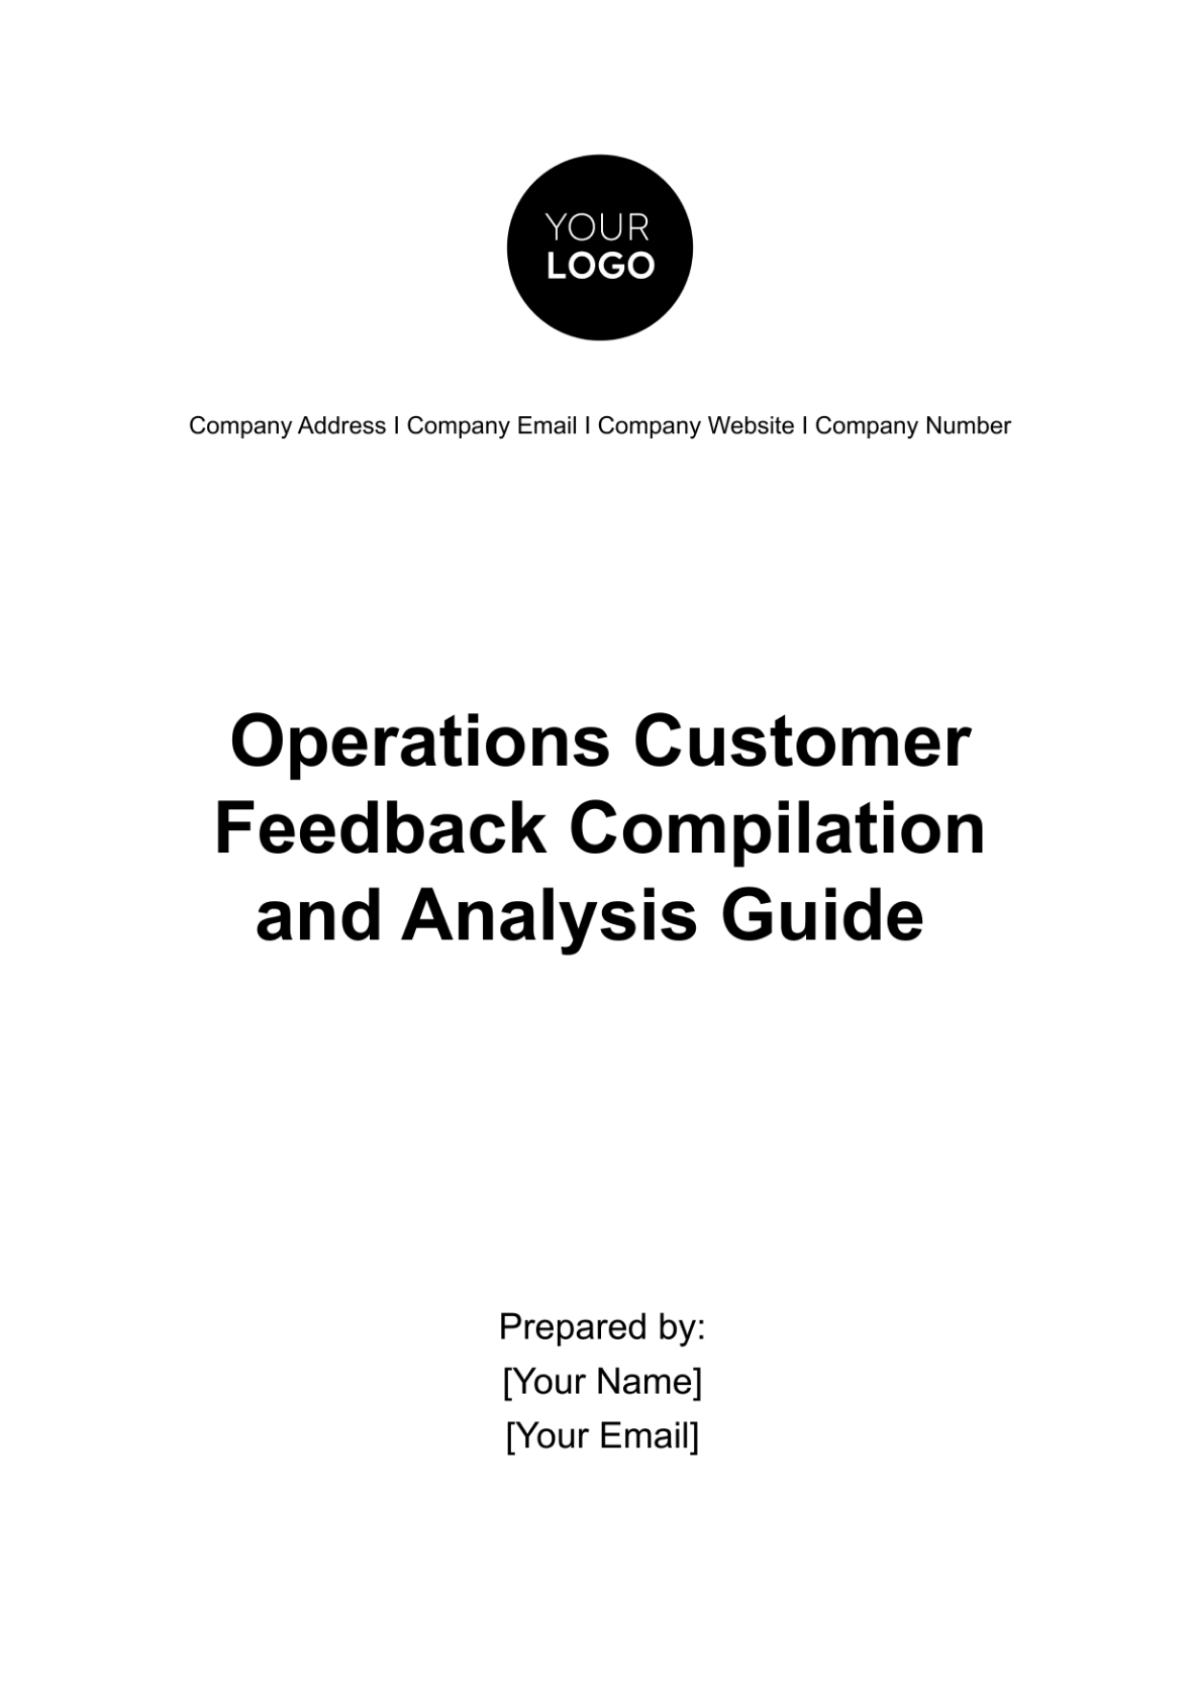 Operations Customer Feedback Compilation and Analysis Guide Template